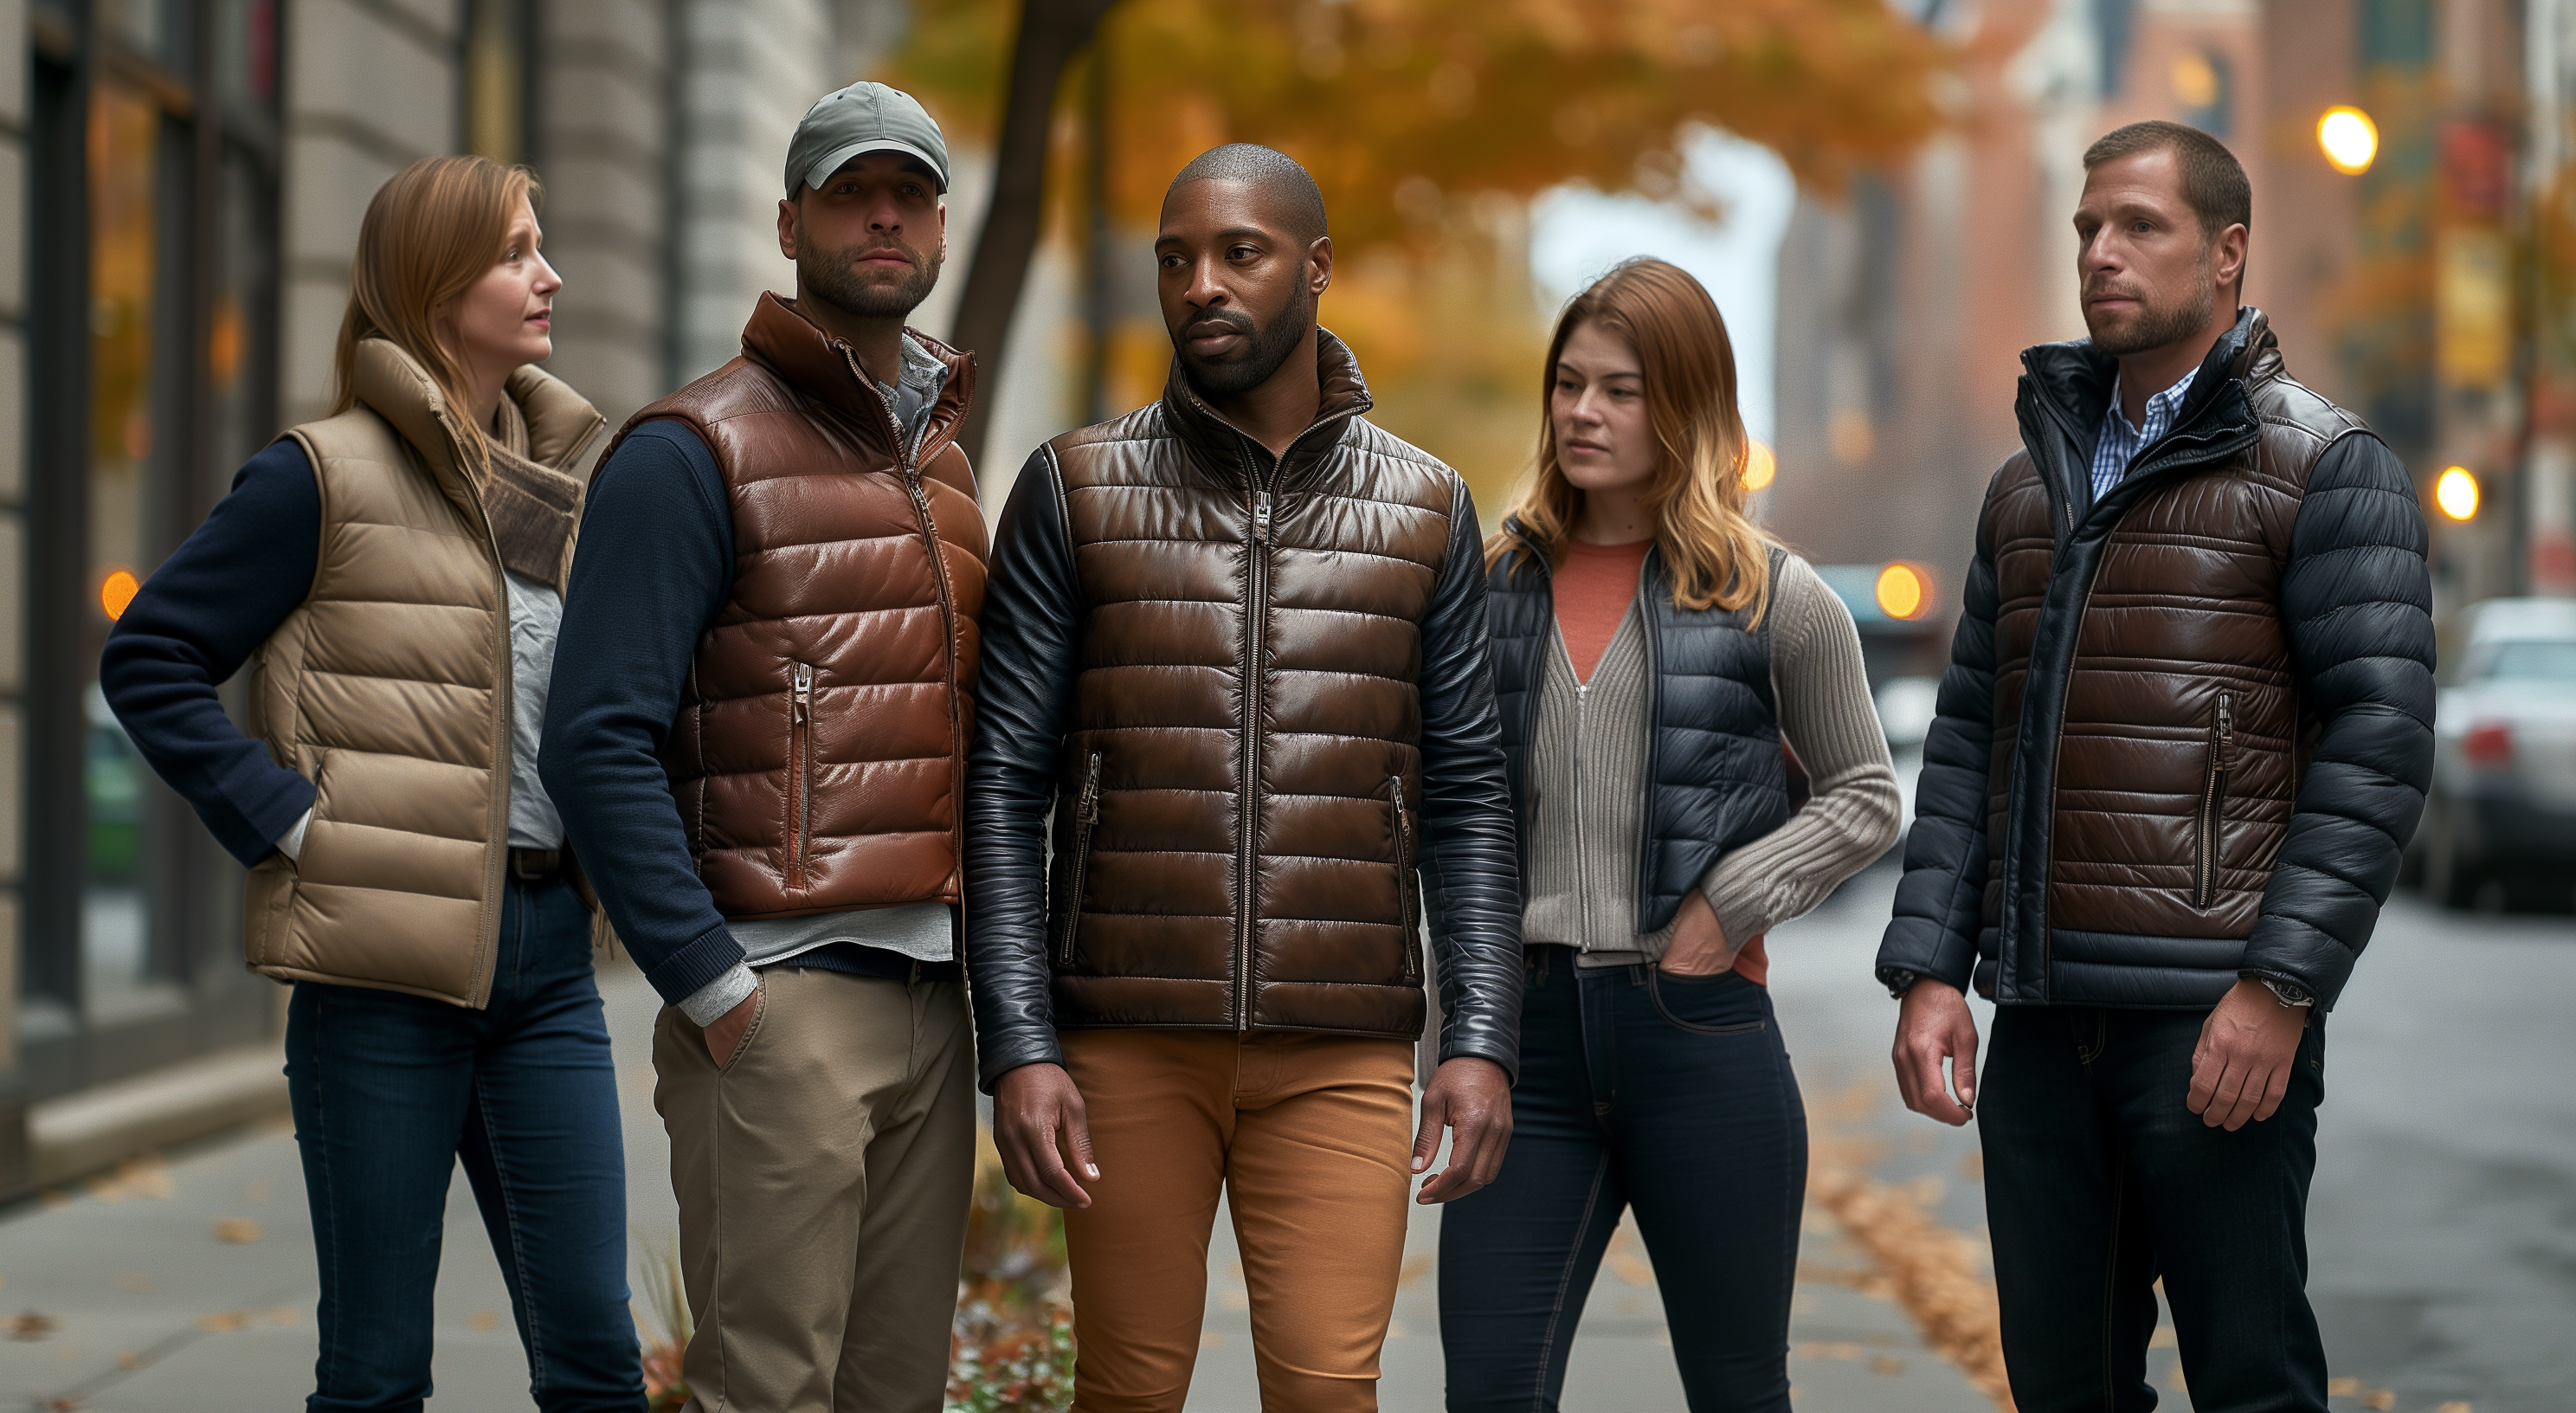 image showcasing a diverse group of men and women wearing leather puffer vests.